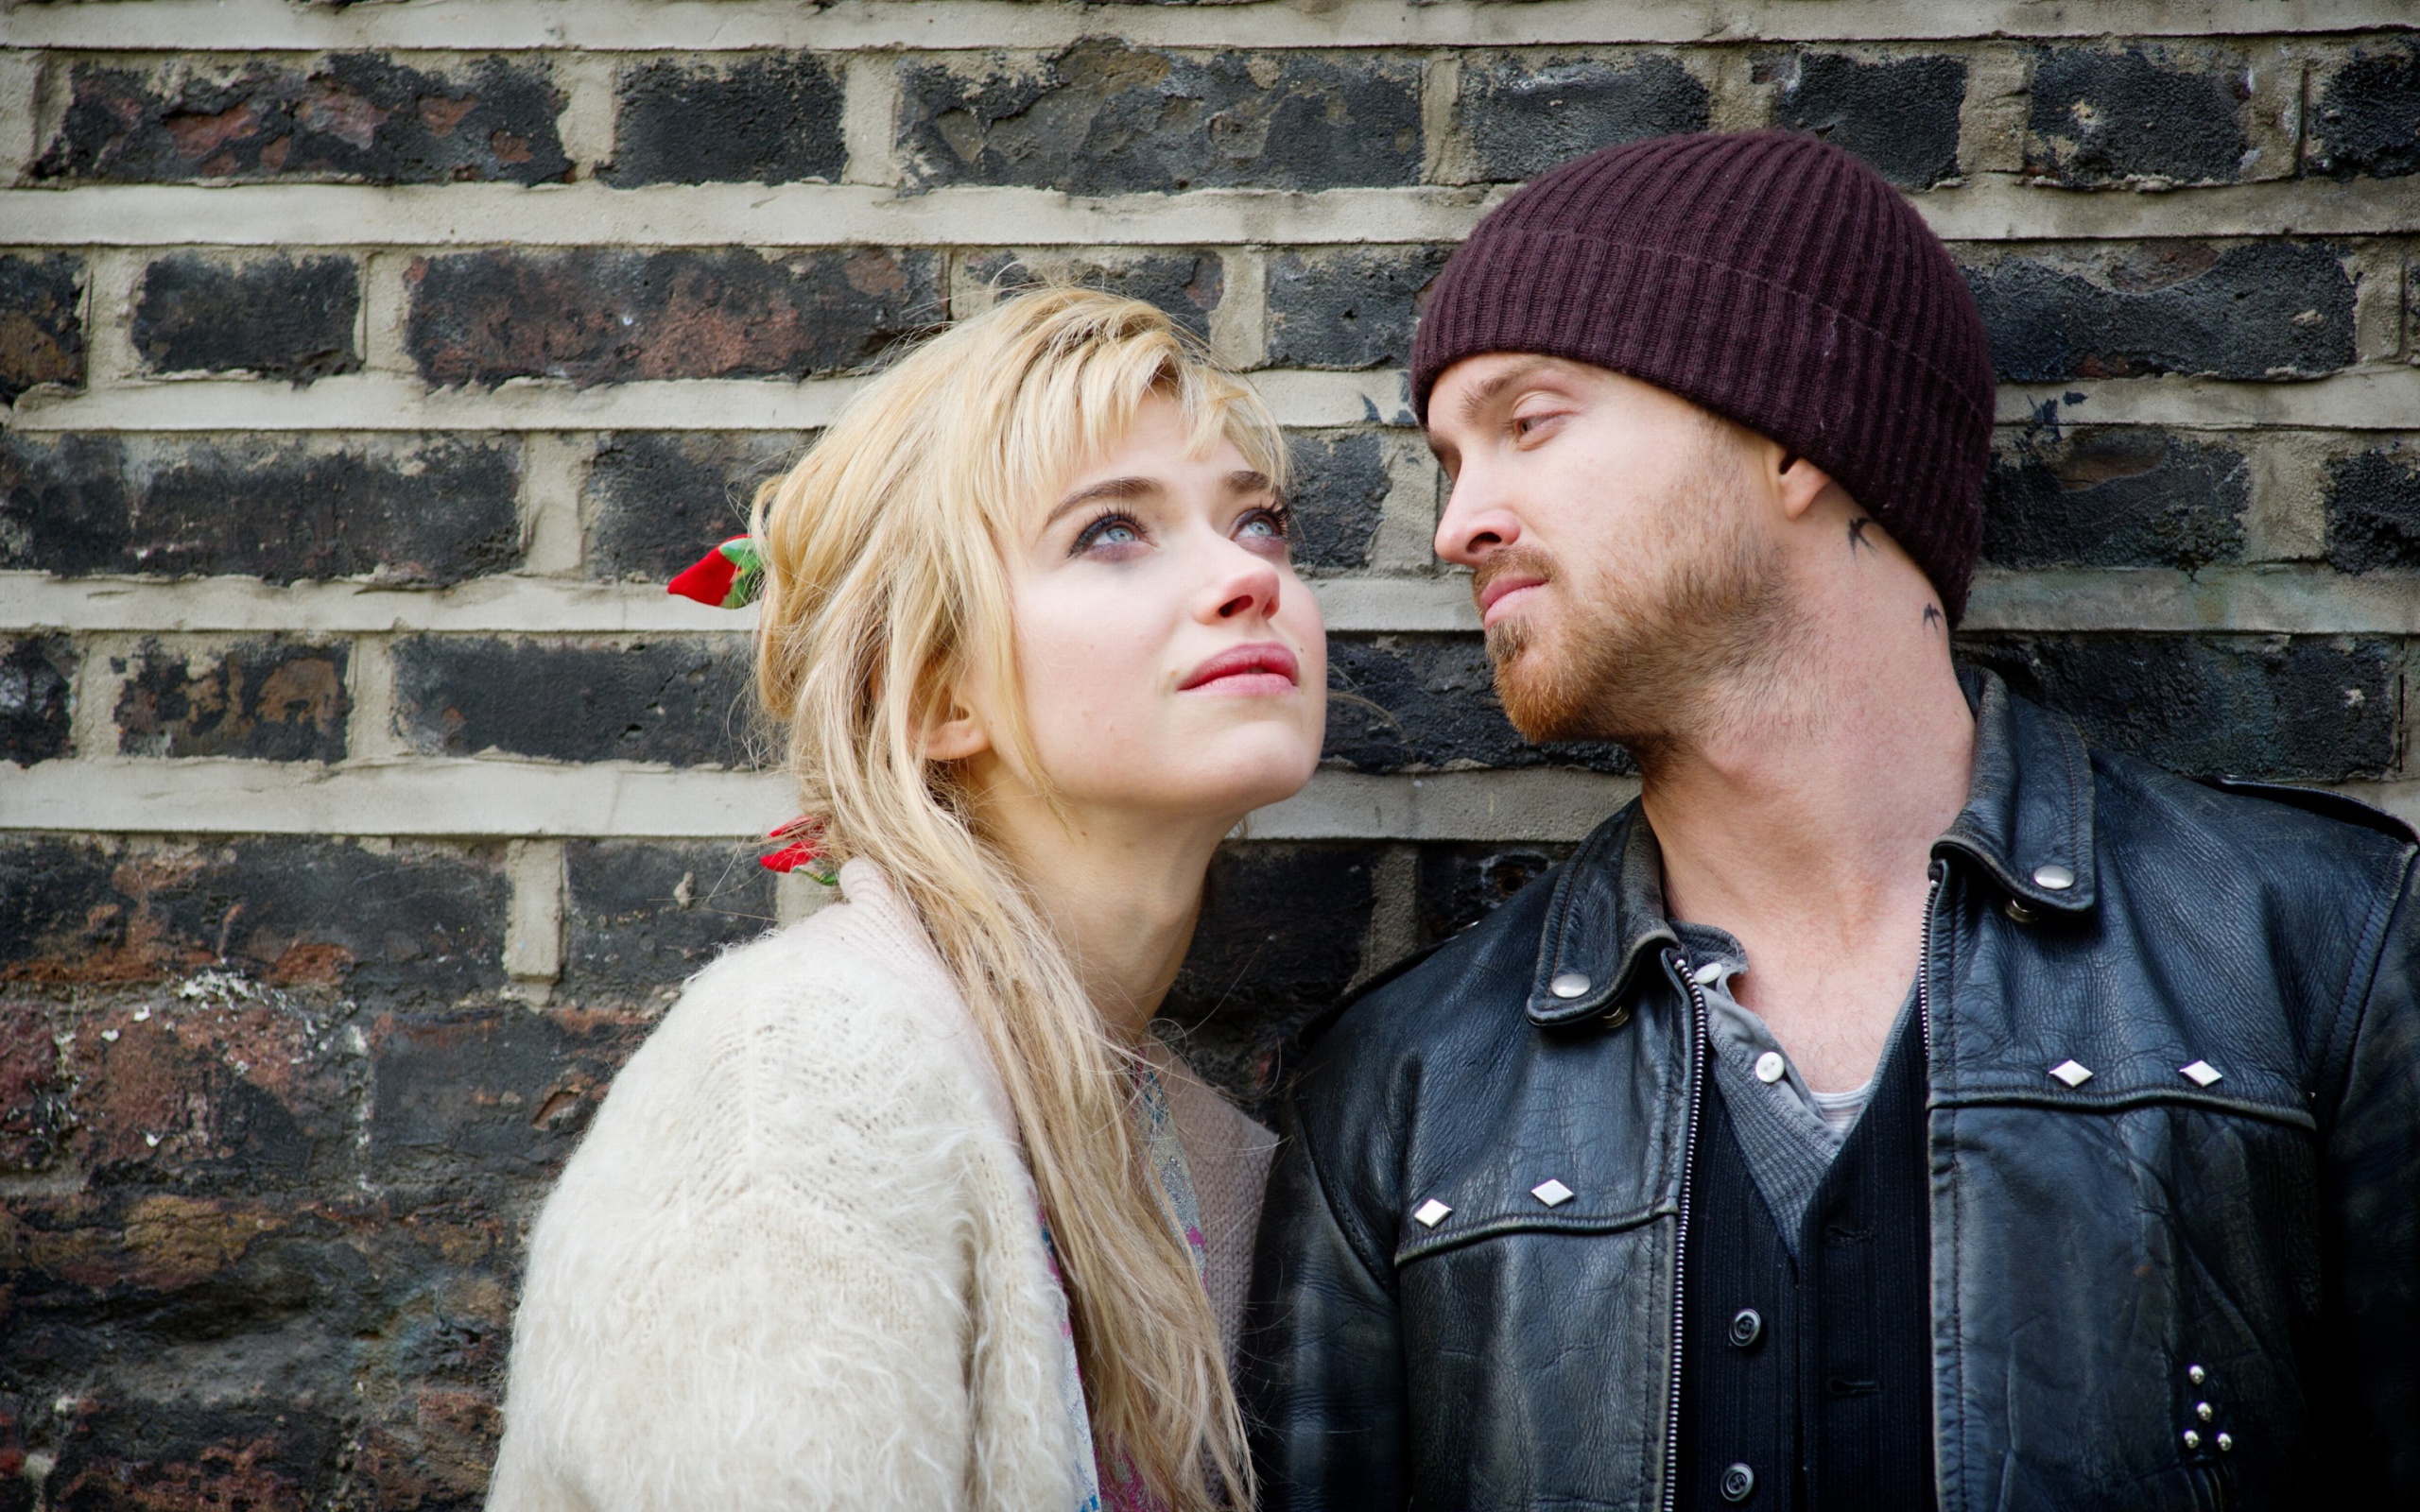 Das A Long Way Down with Aaron Paul and Imogen Poots Wallpaper 2560x1600